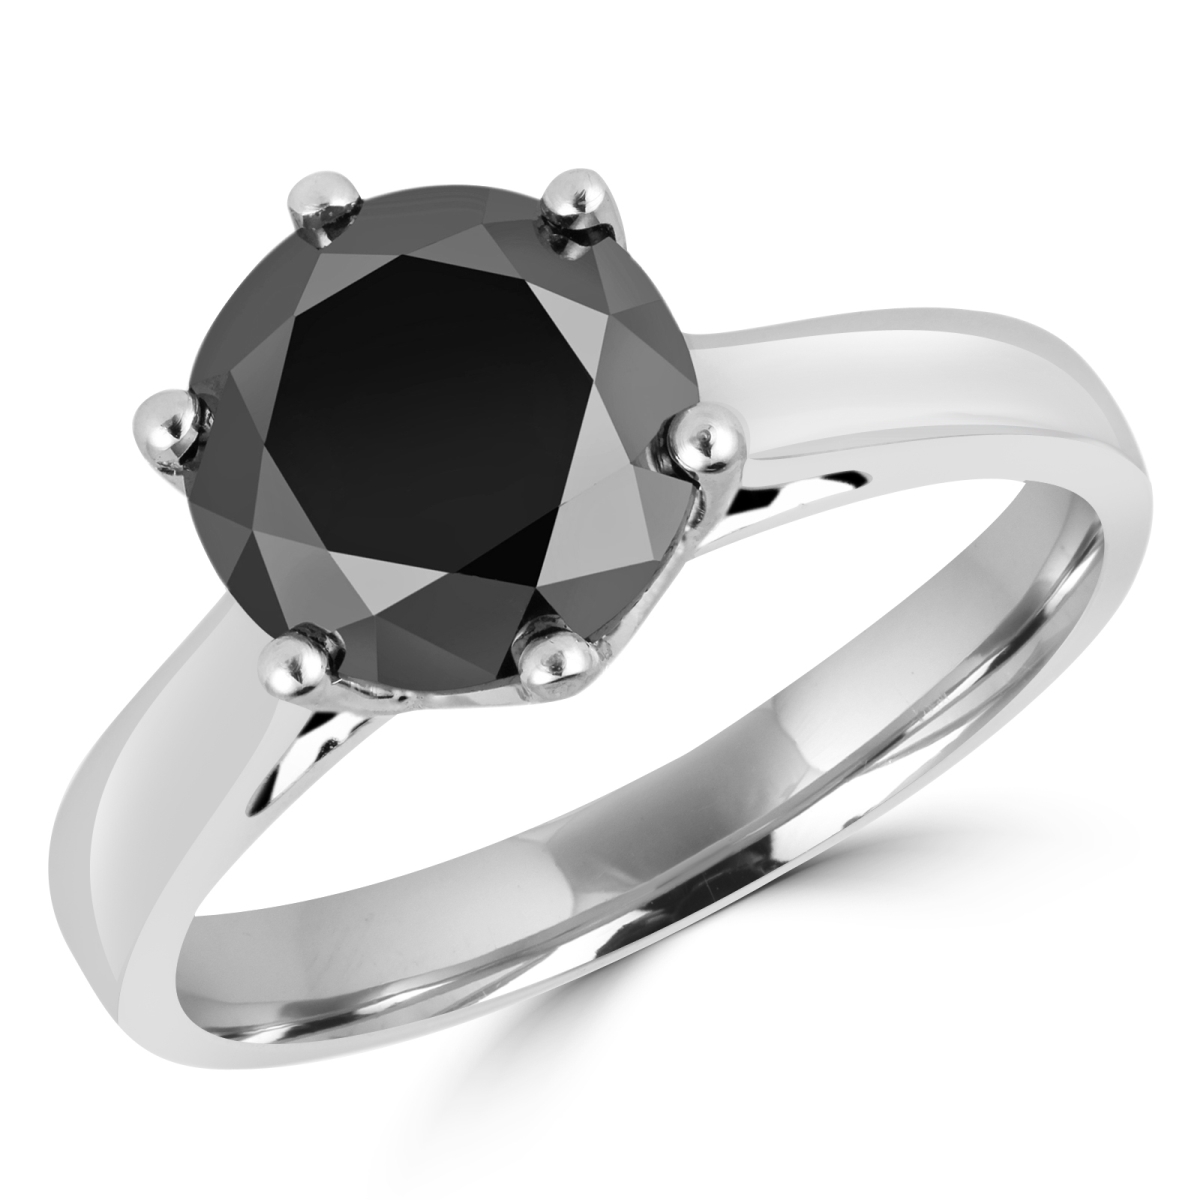 Picture of Majesty Diamonds MD170223 0.87 CT Round BlacK Diamond 6 Prong Solitaire Engagement Ring in 14K